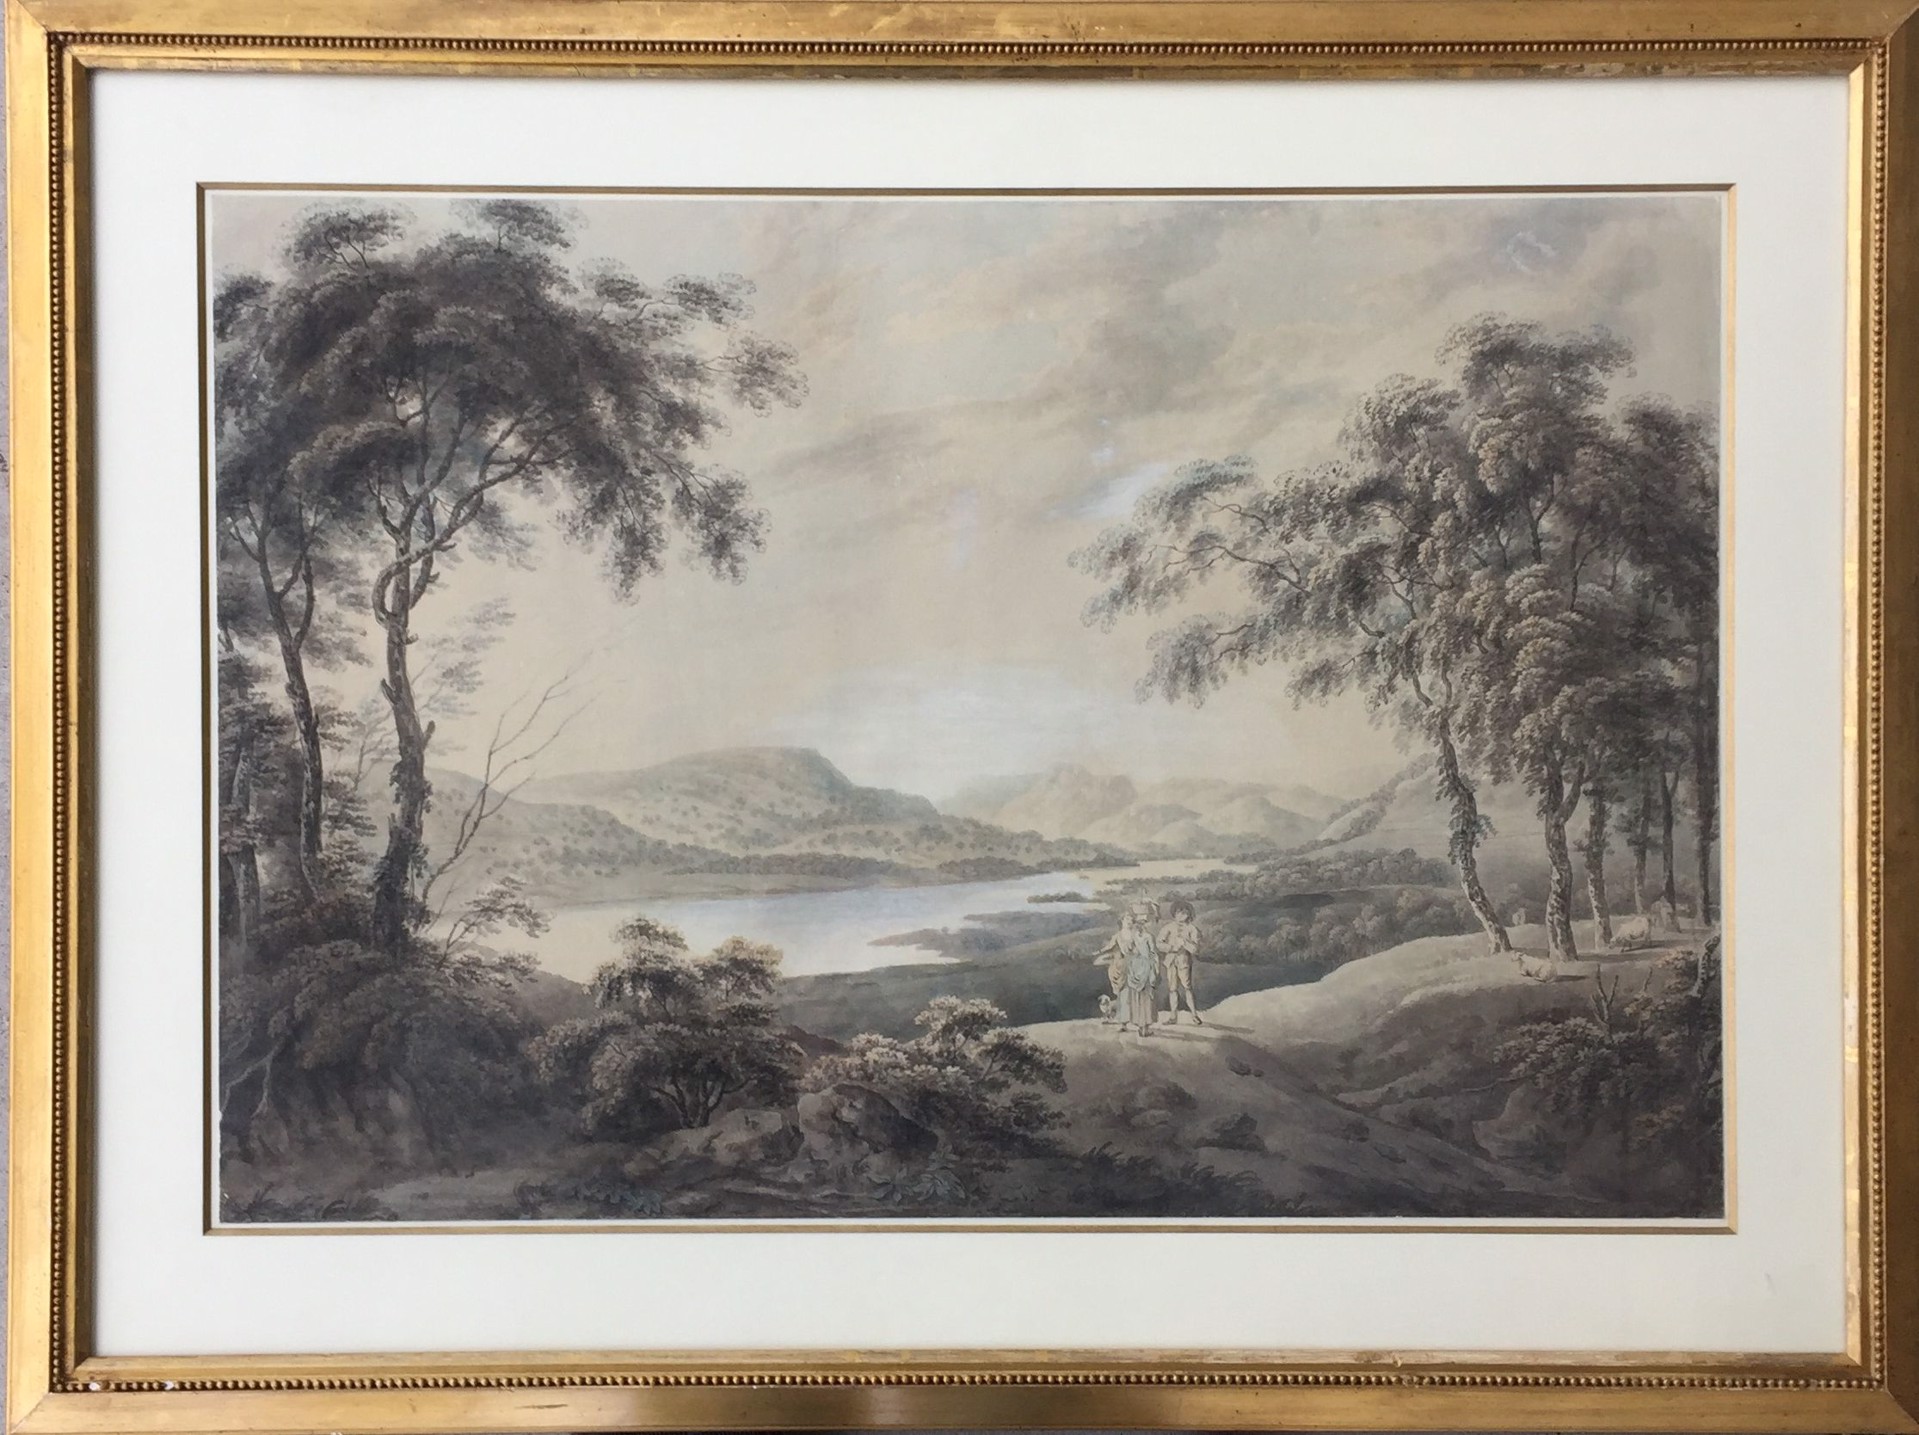 A View on the English Lake District by Edward Edwards (1738-1806)